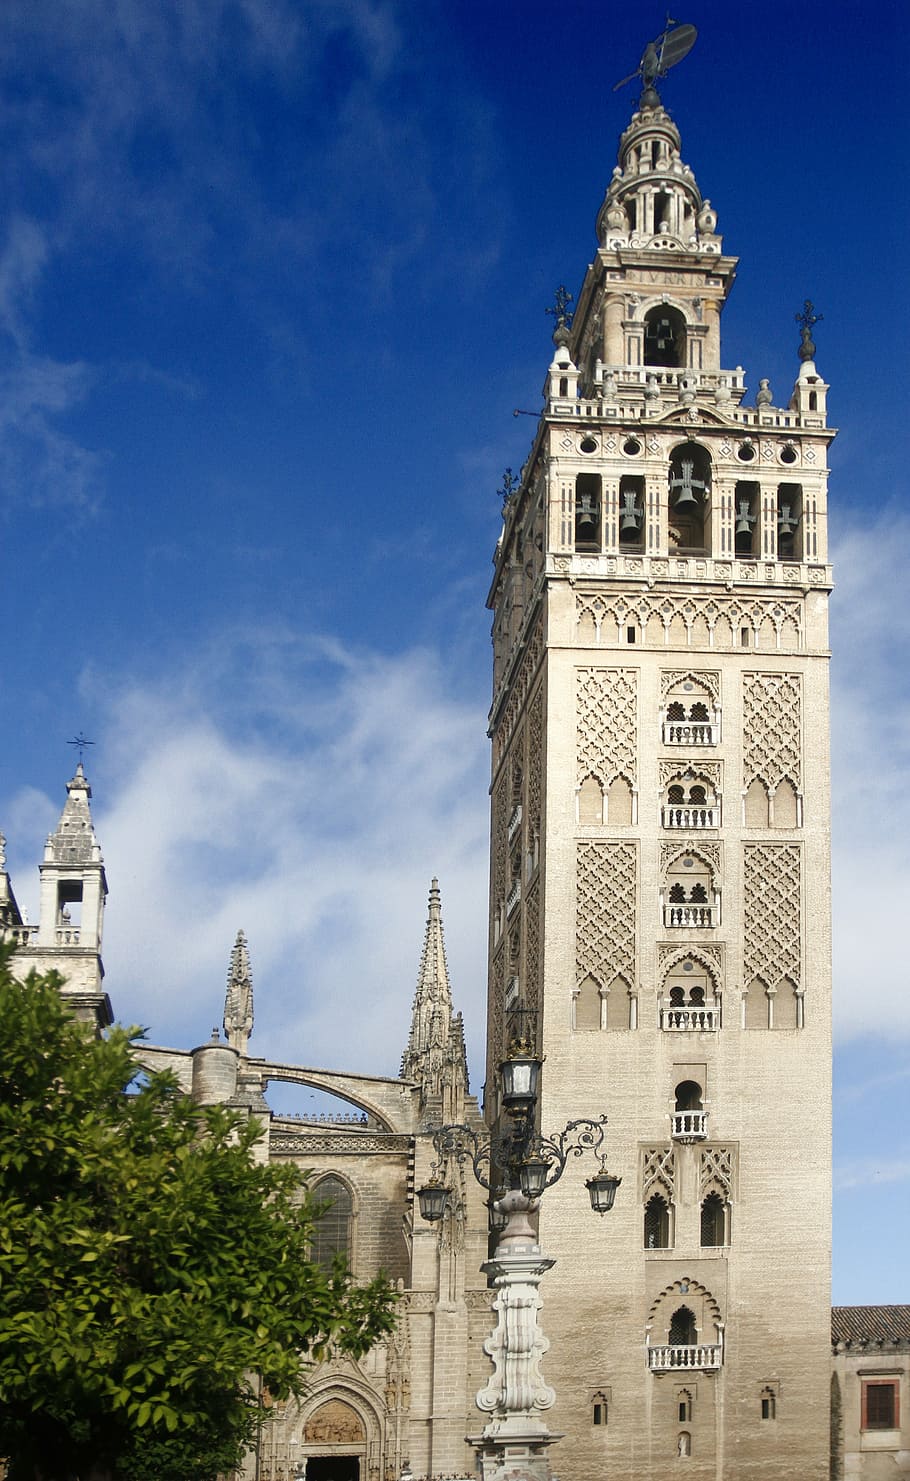 giralda, seville, andalusia, cathedral, monuments, tower, old building, spain, catholics, artistic